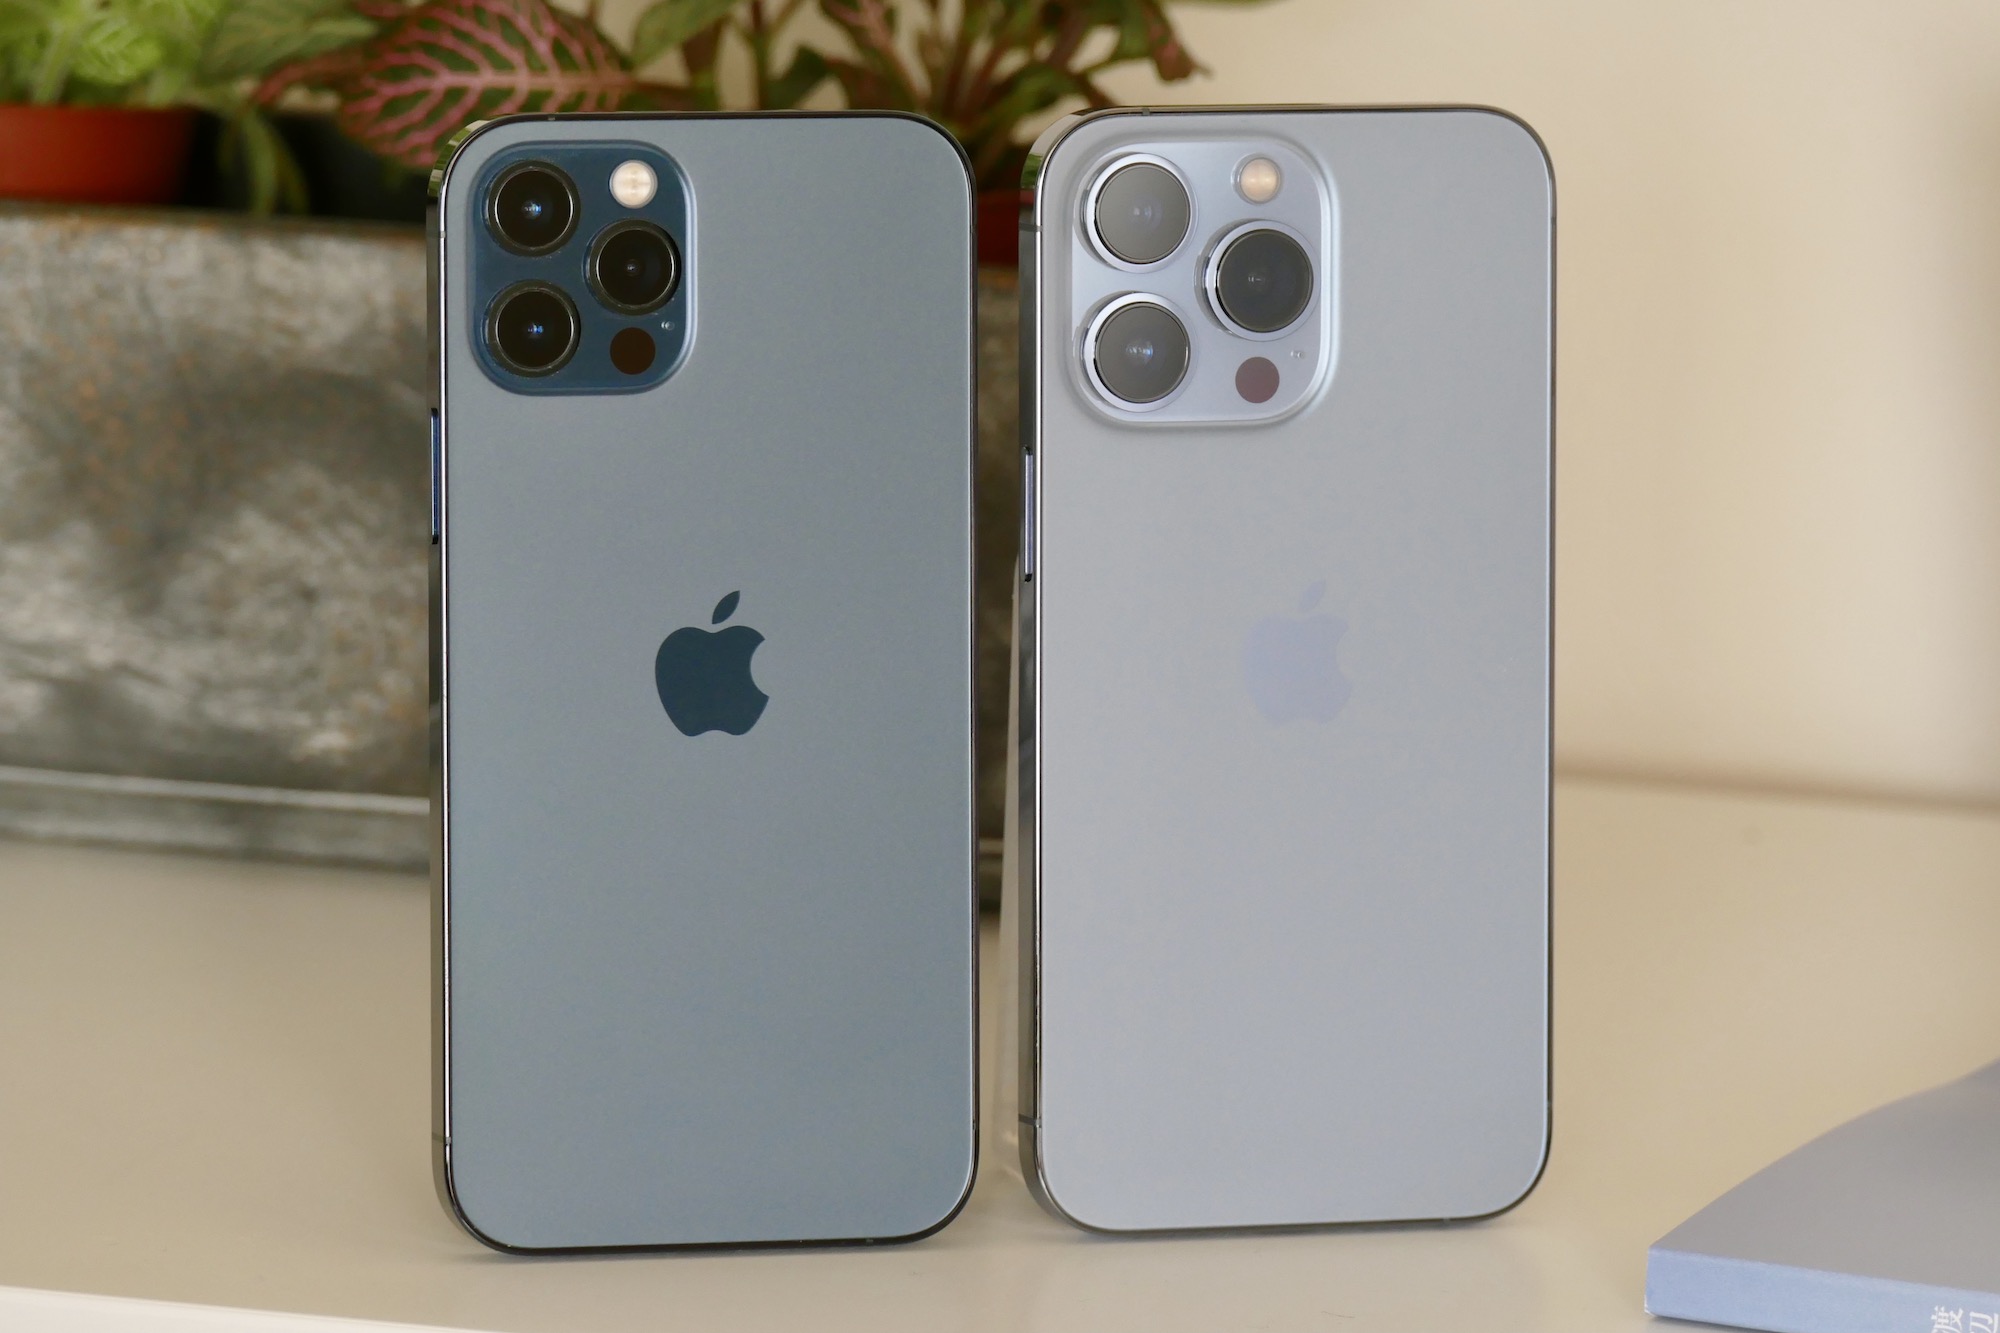 The iPhone 13 Pro's Main Camera Rival is the iPhone 12 Pro